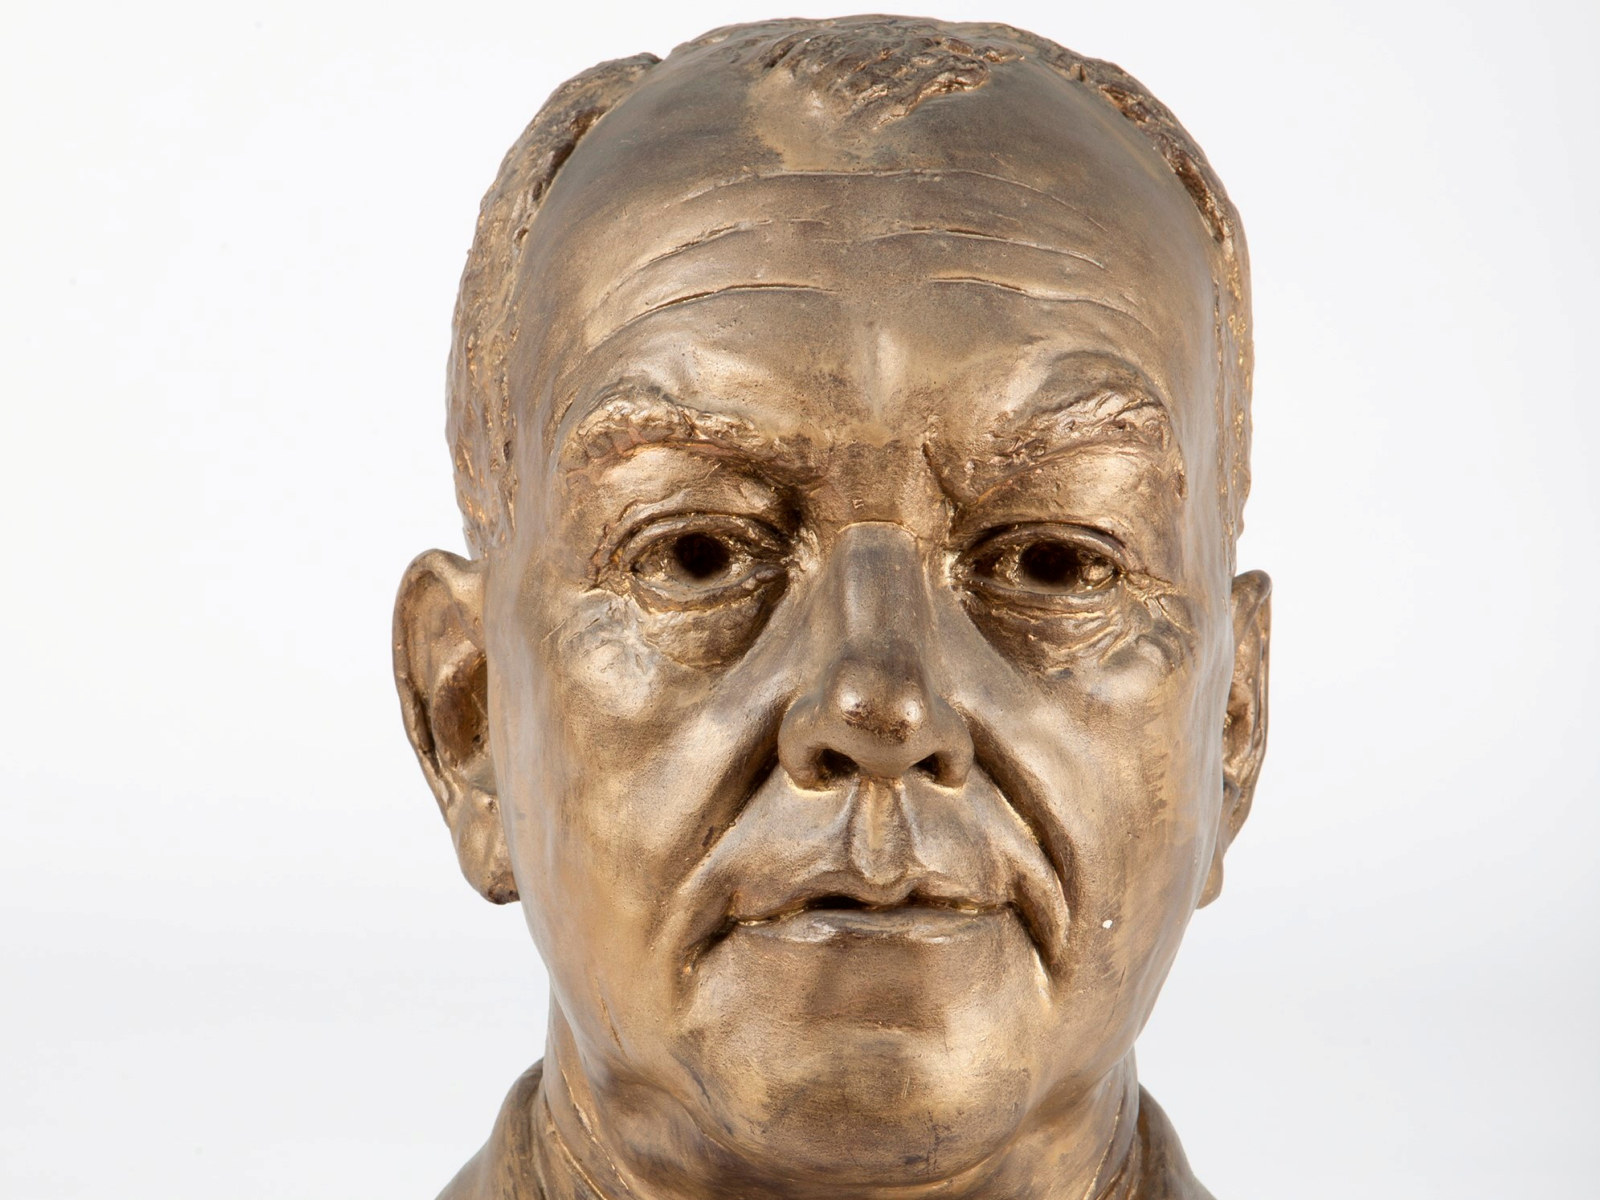 Gold painted plaster bust of William John Mackay, Commissioner of Police